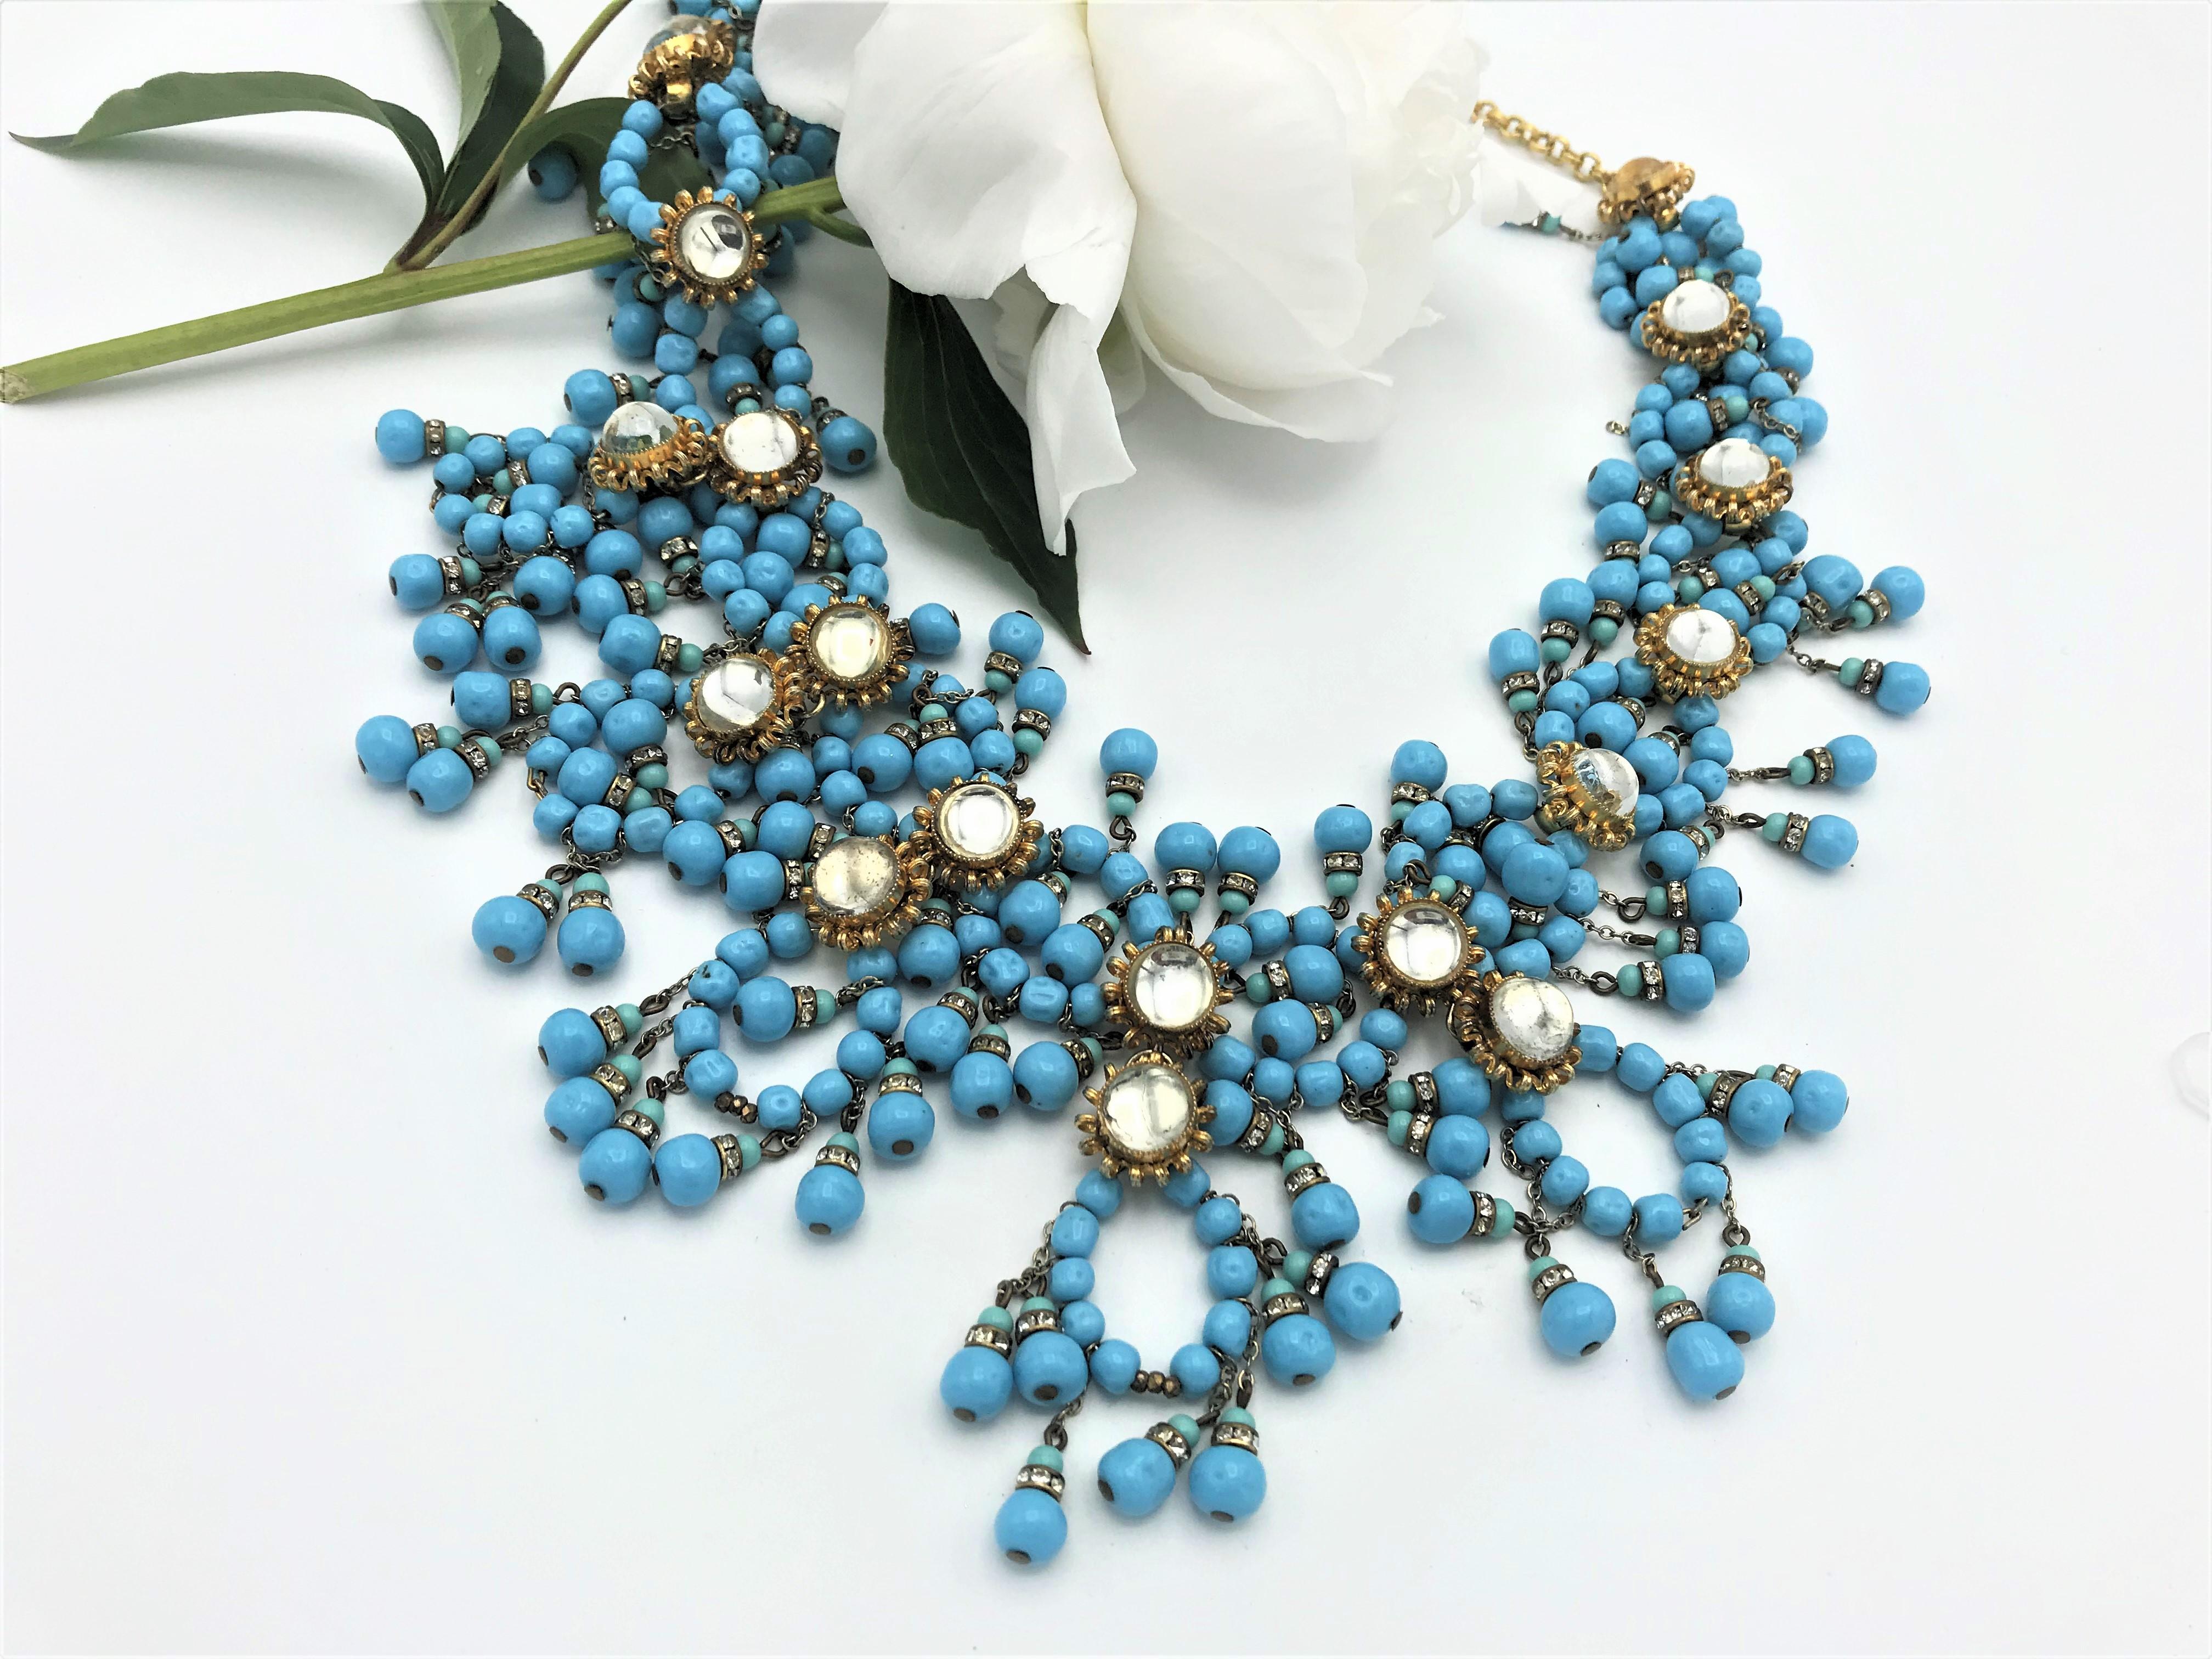 A beautiful imaginative necklace designed by William de Lillo. Consisting of many turquoise colored glass beads, different circles that are hung with many small turquoise tassels, as well as rosettes with round clear rhinestones connect the